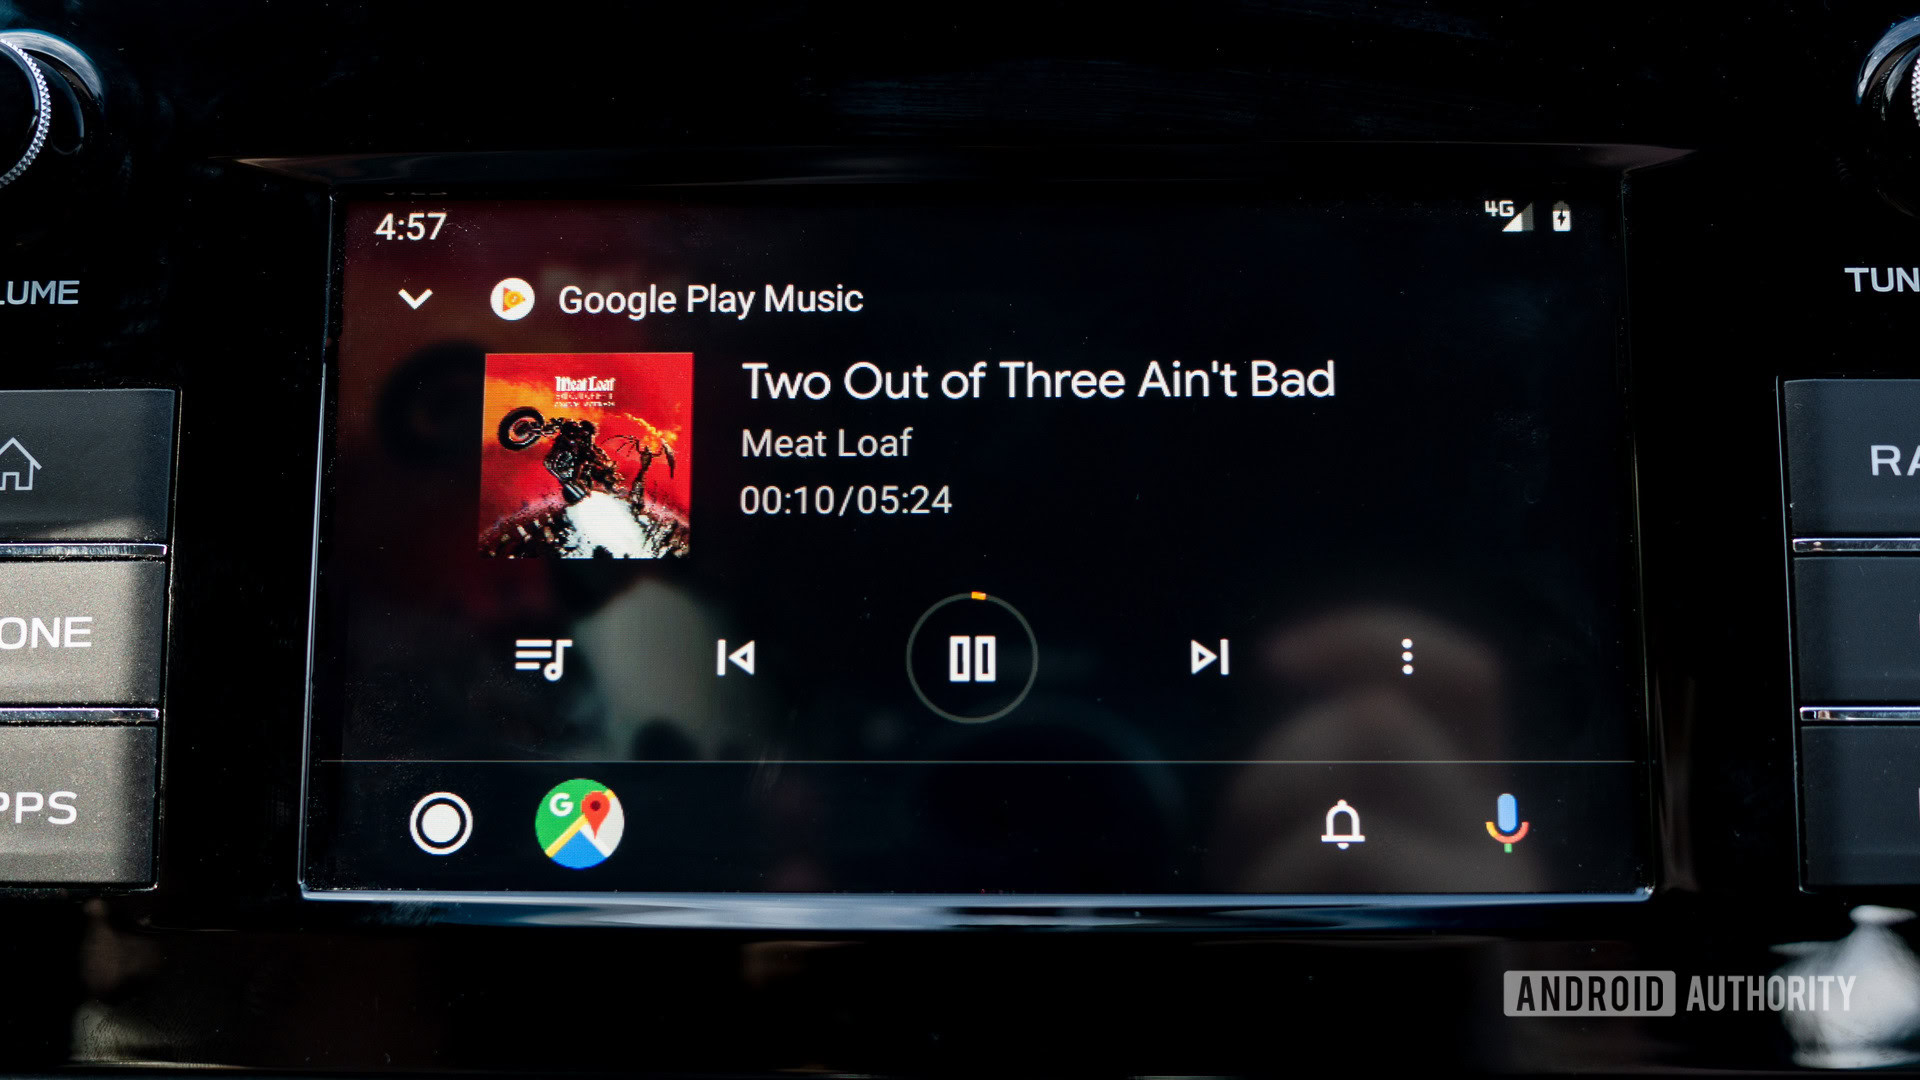 Android Auto 2019 update: Dark theme, new app launcher, and more